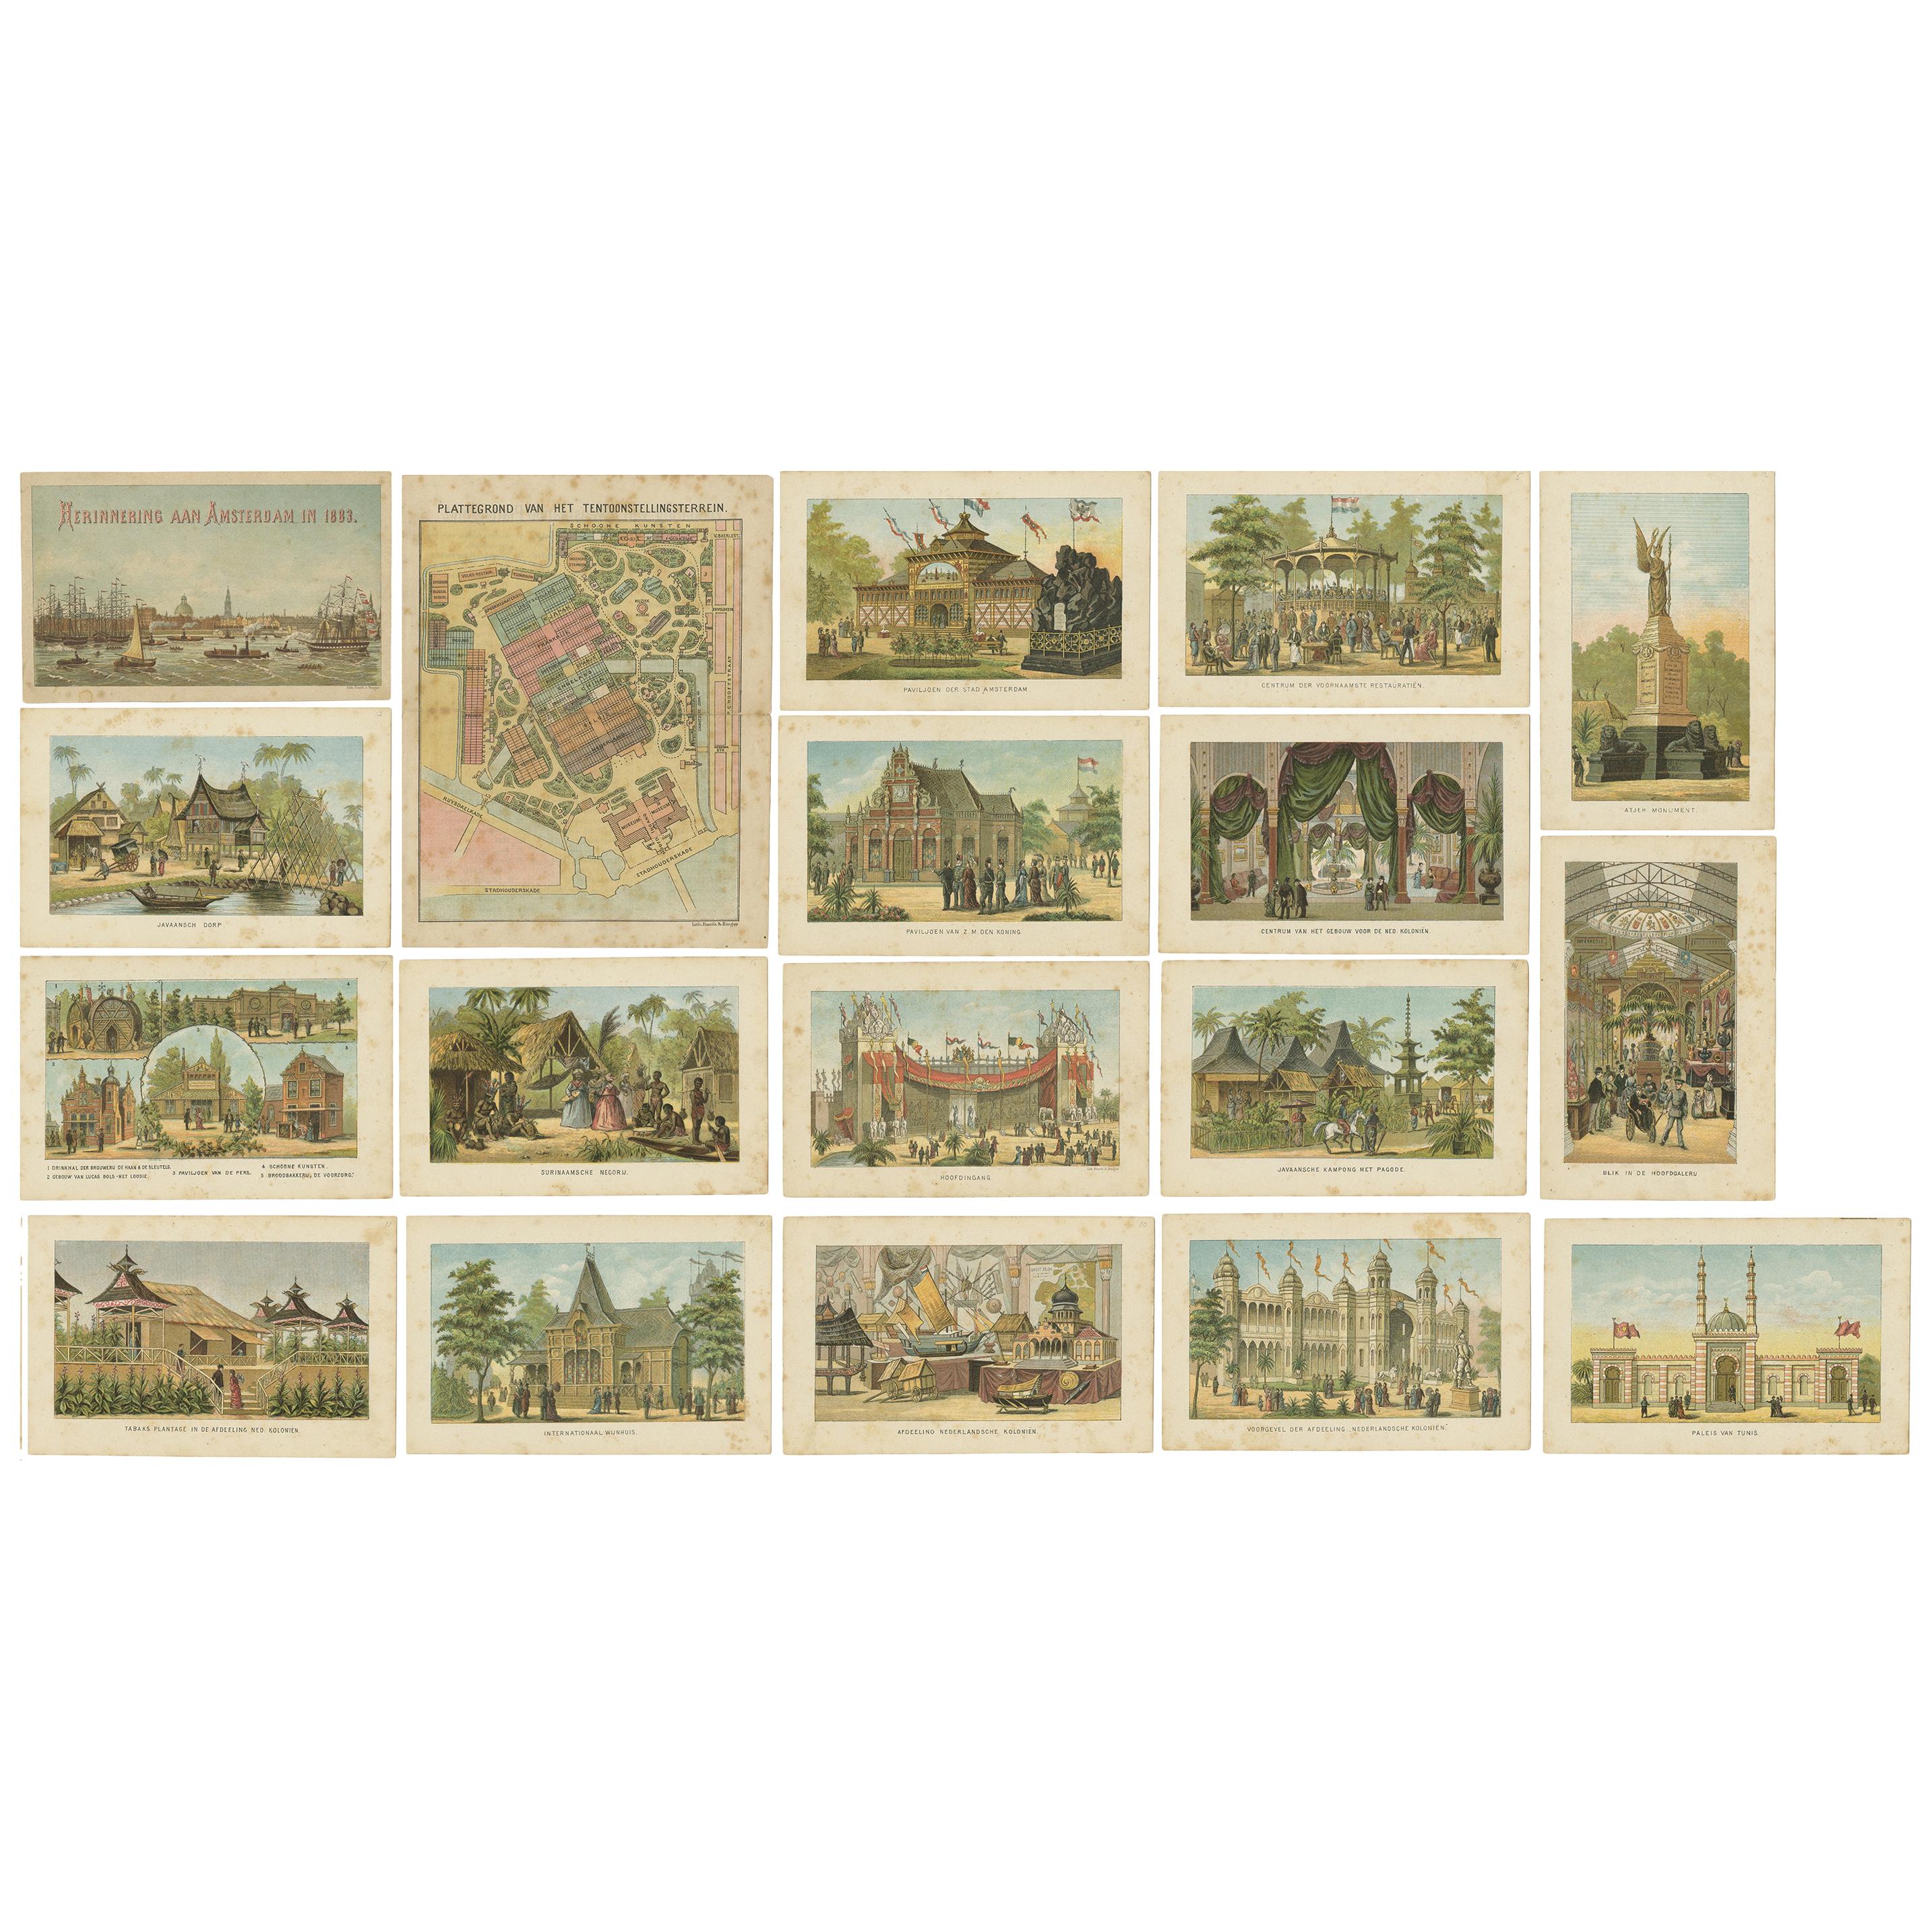 Set of 18 Prints with Views of Amsterdam and Dutch Colonies, 1883